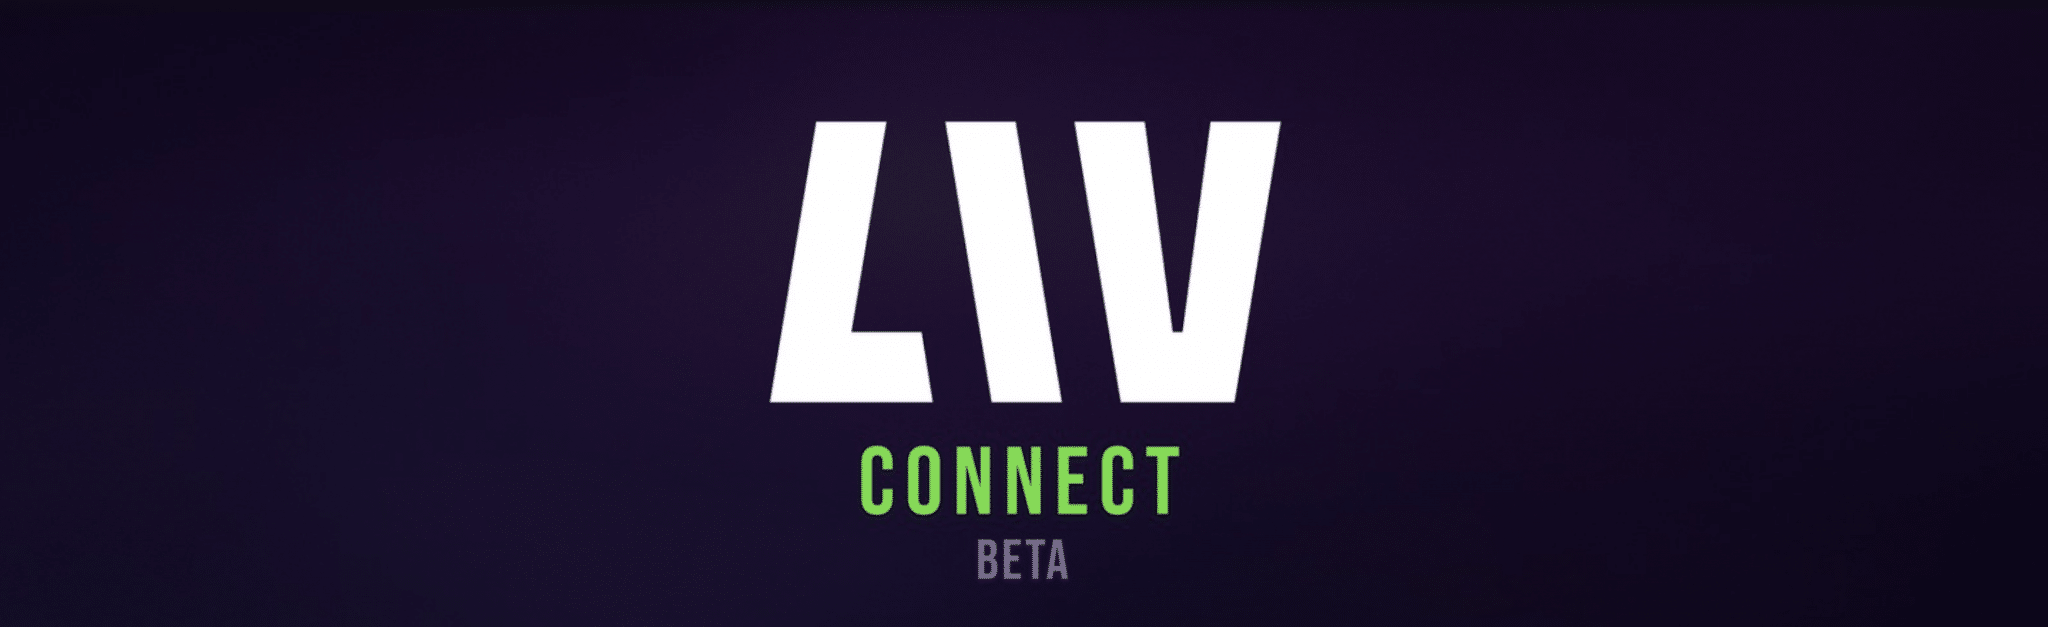 install liv connect on the oculus quest